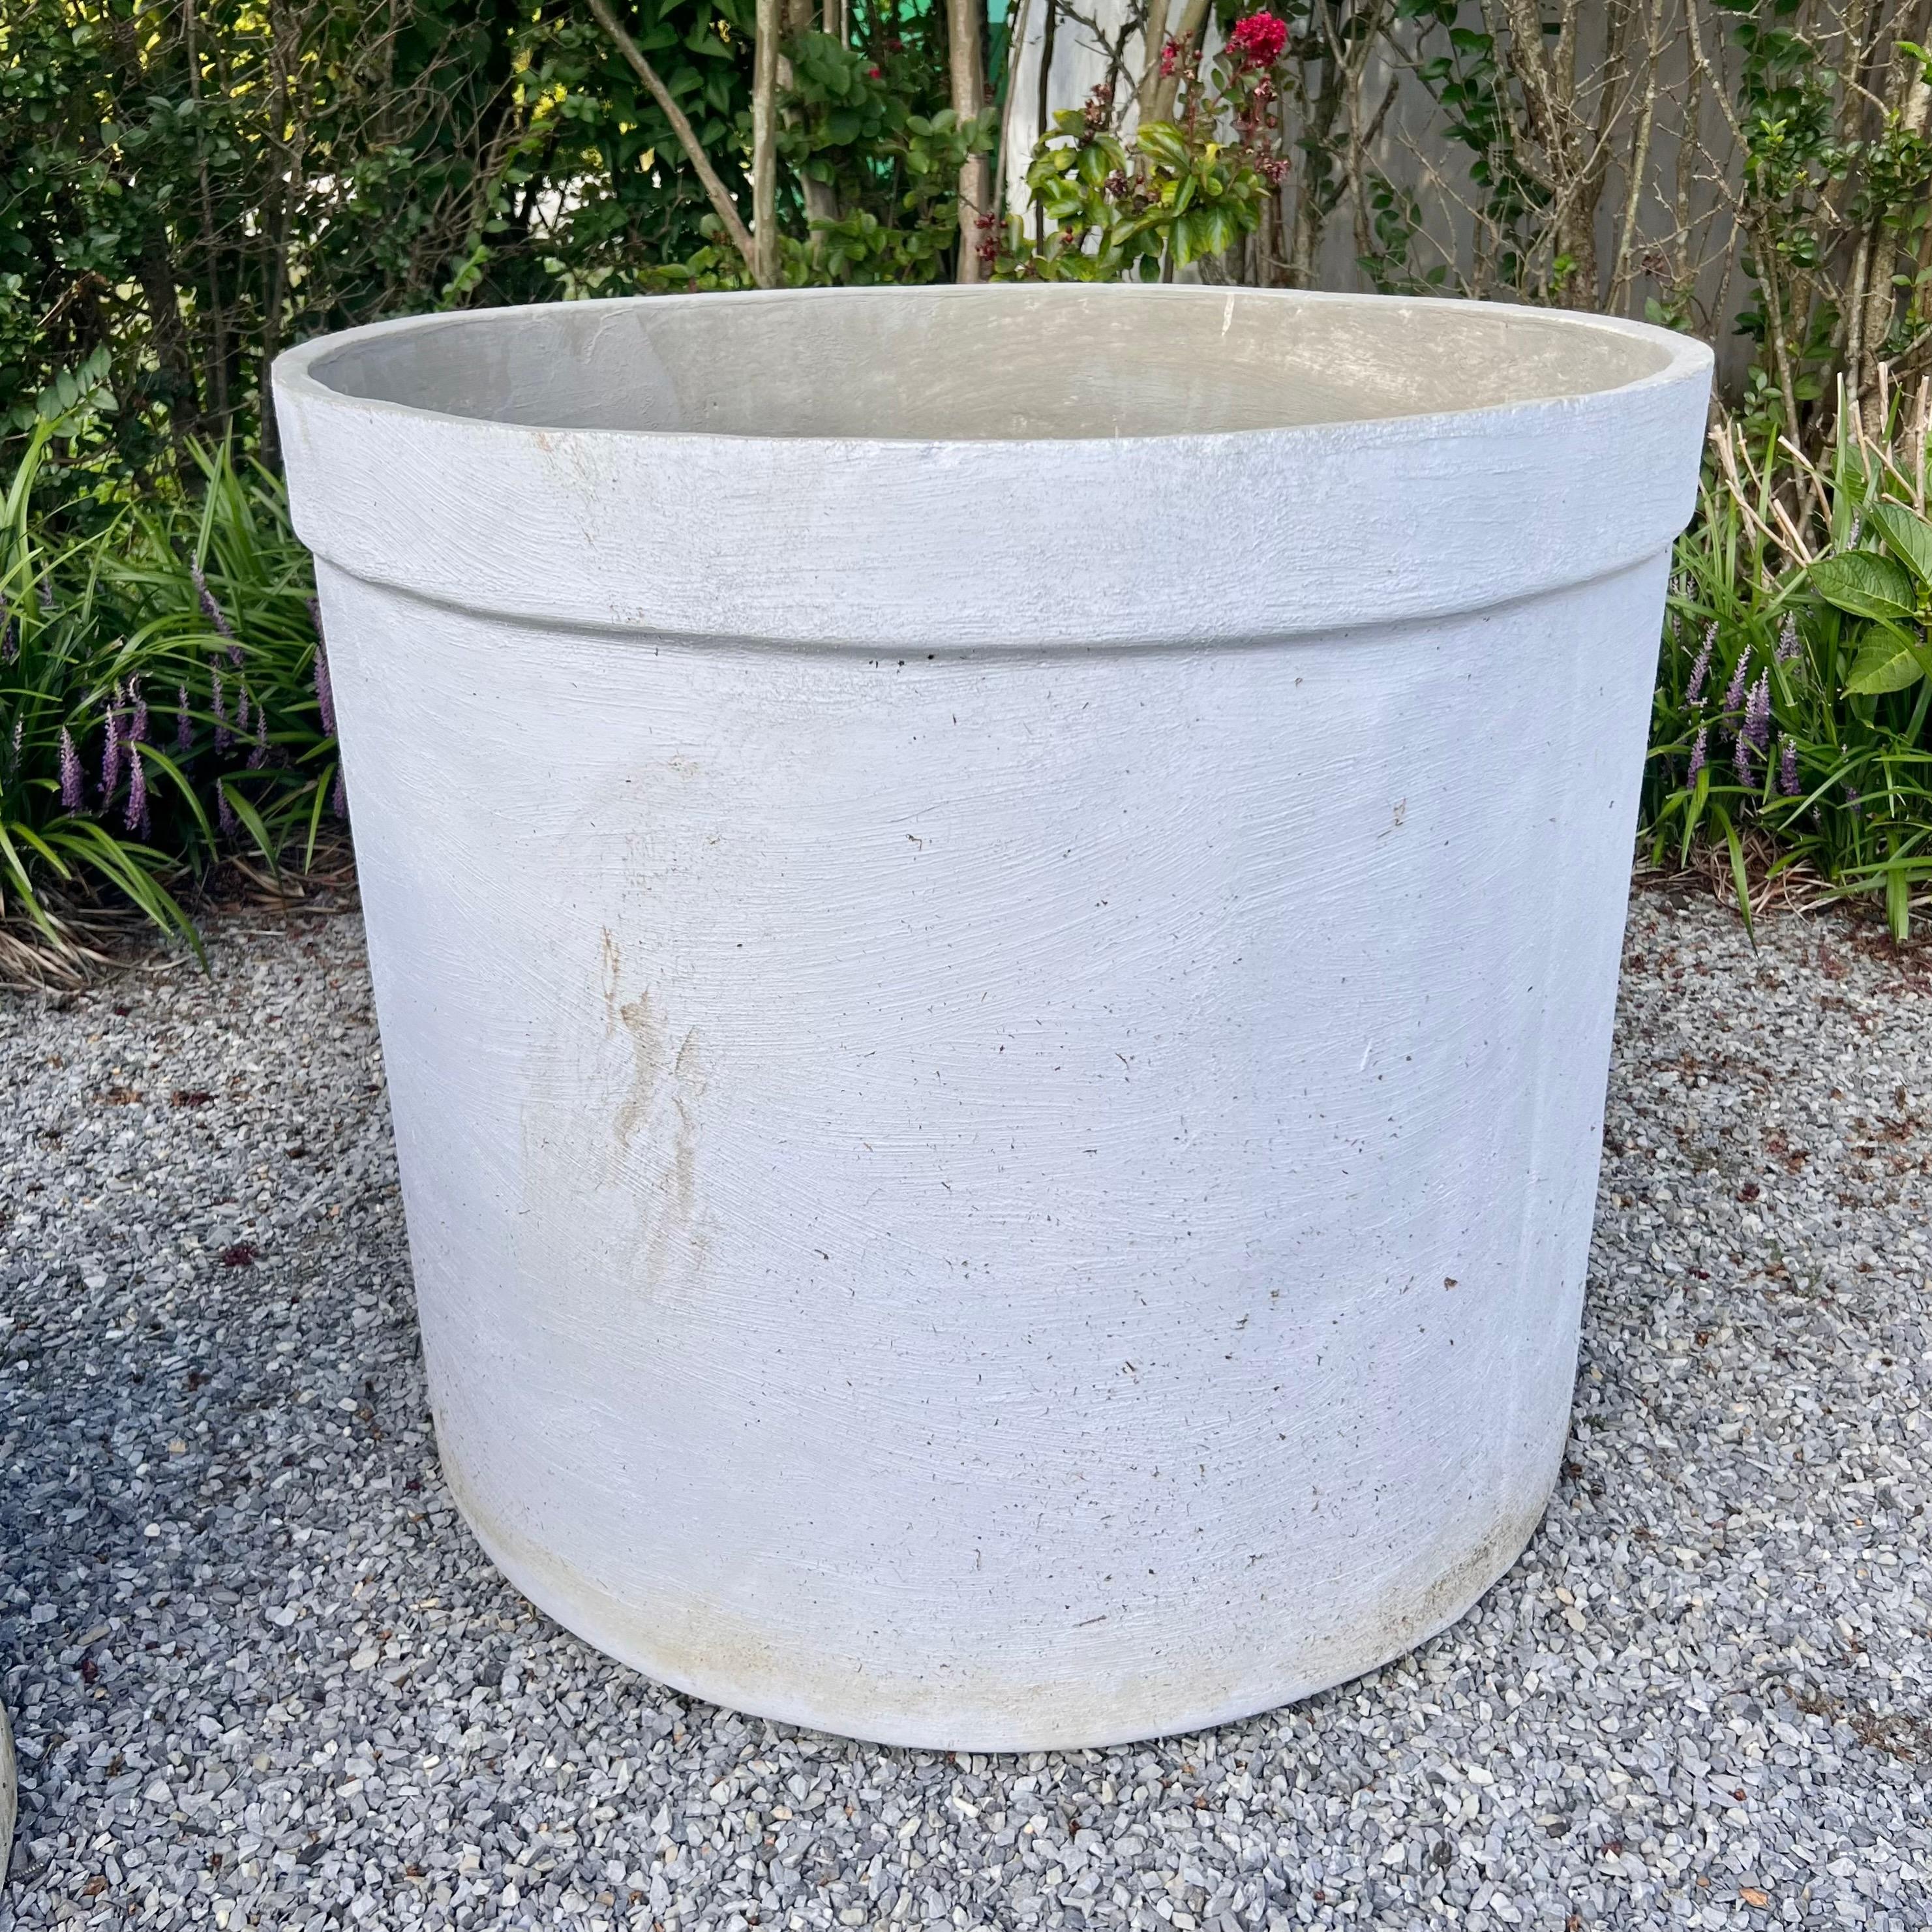 Gigantic tree planter by the Swiss design house Eternit. Extremely difficult to find vintage planters large enough to plant and hold a large tree. This would make a wonderful and functional piece for your home or garden. Painted greyish/white on its